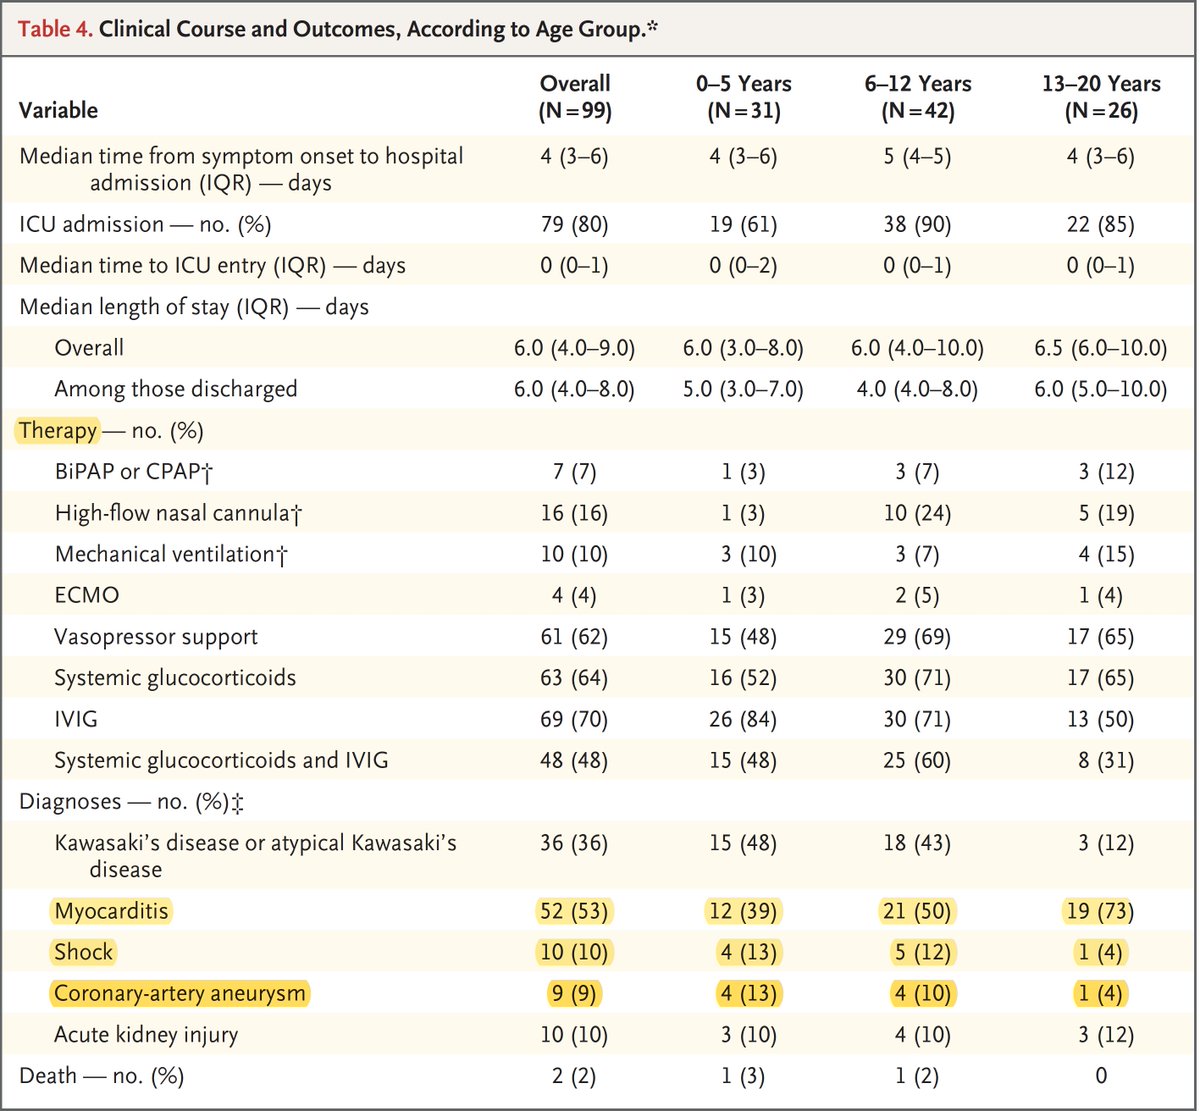 Here is the New York State report today of 99 patients https://www.nejm.org/doi/full/10.1056/NEJMoa2021756?query=featured_coronaviruswith clusters of manifestations (the high % skin, GI, cardiac, neurologic, KD=Kawasaki's), therapy used, and associated diagnoses